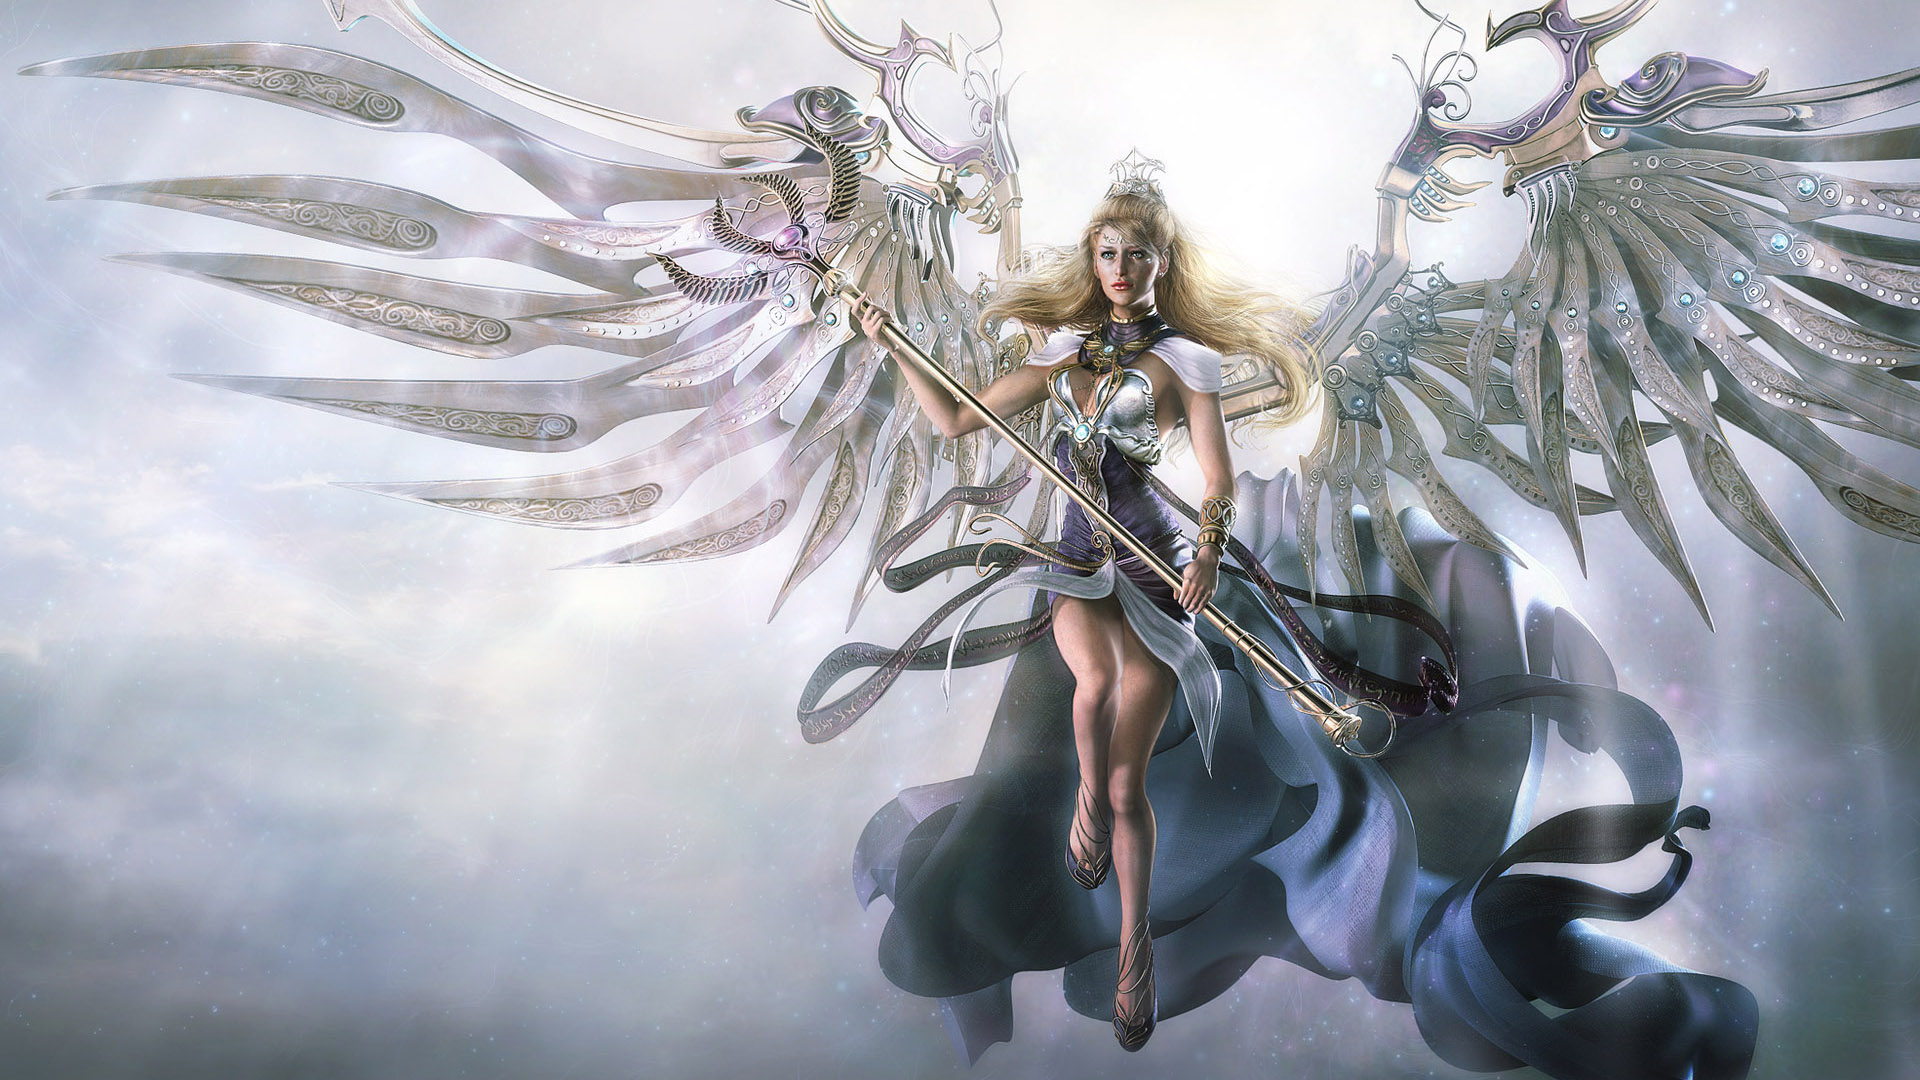 Awesome Angel 3d Fantasy Wallpaper HD Widescreen 1080p With